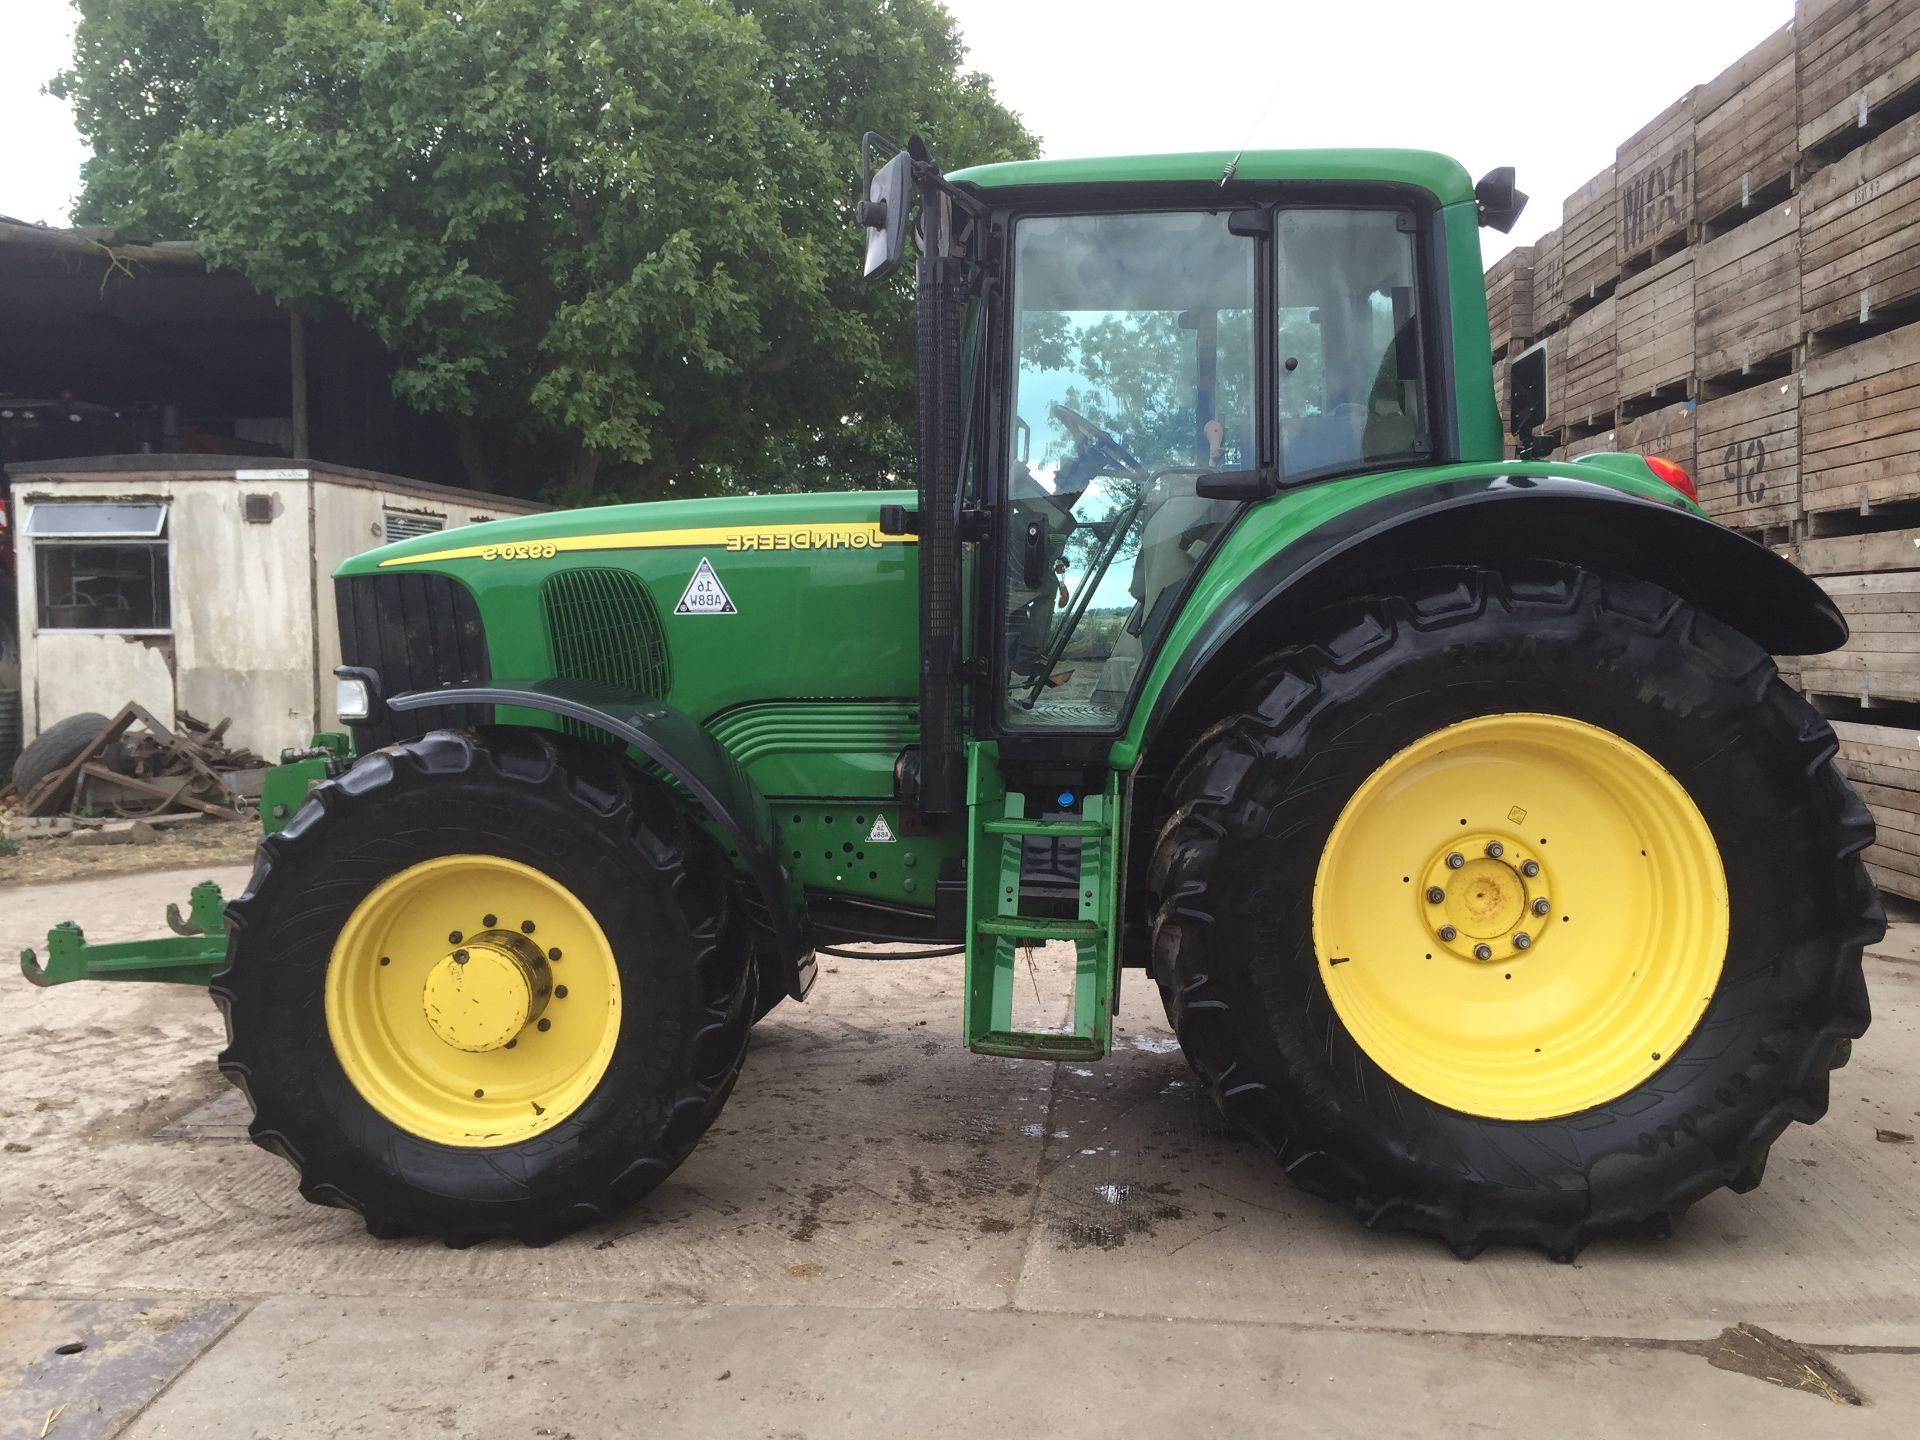 2005 John Deere 6920S Tractor 50k Power Quad c/w front linkage & pto. Location Bourne, Lincolnshire - Image 11 of 12